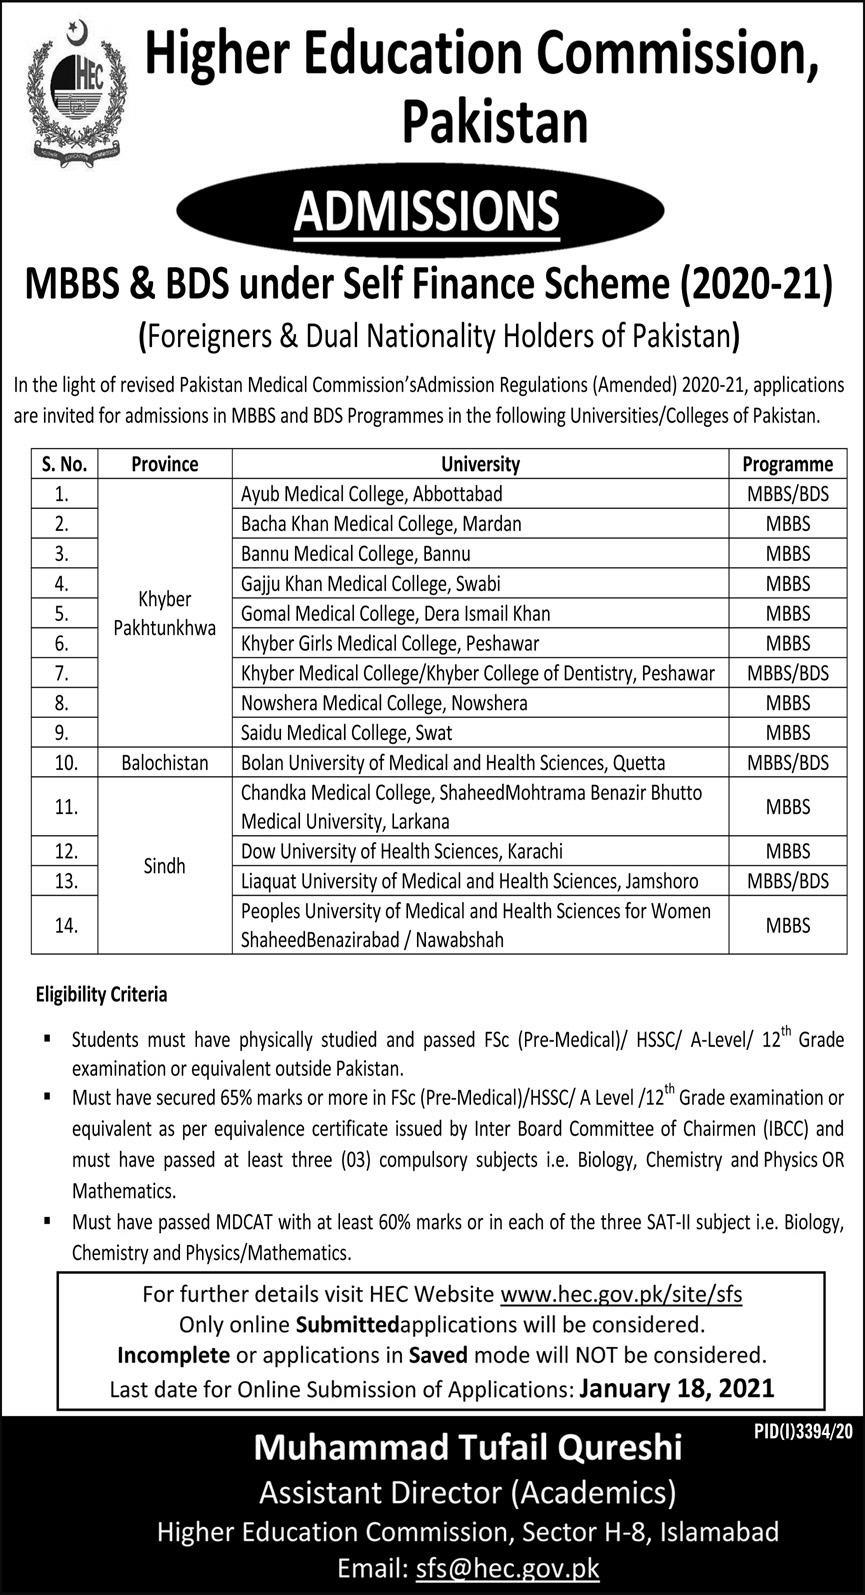 MBBS, BDS, BSc Engr Admission 2020 For Foreigners & Dual Nationals in Pakistan